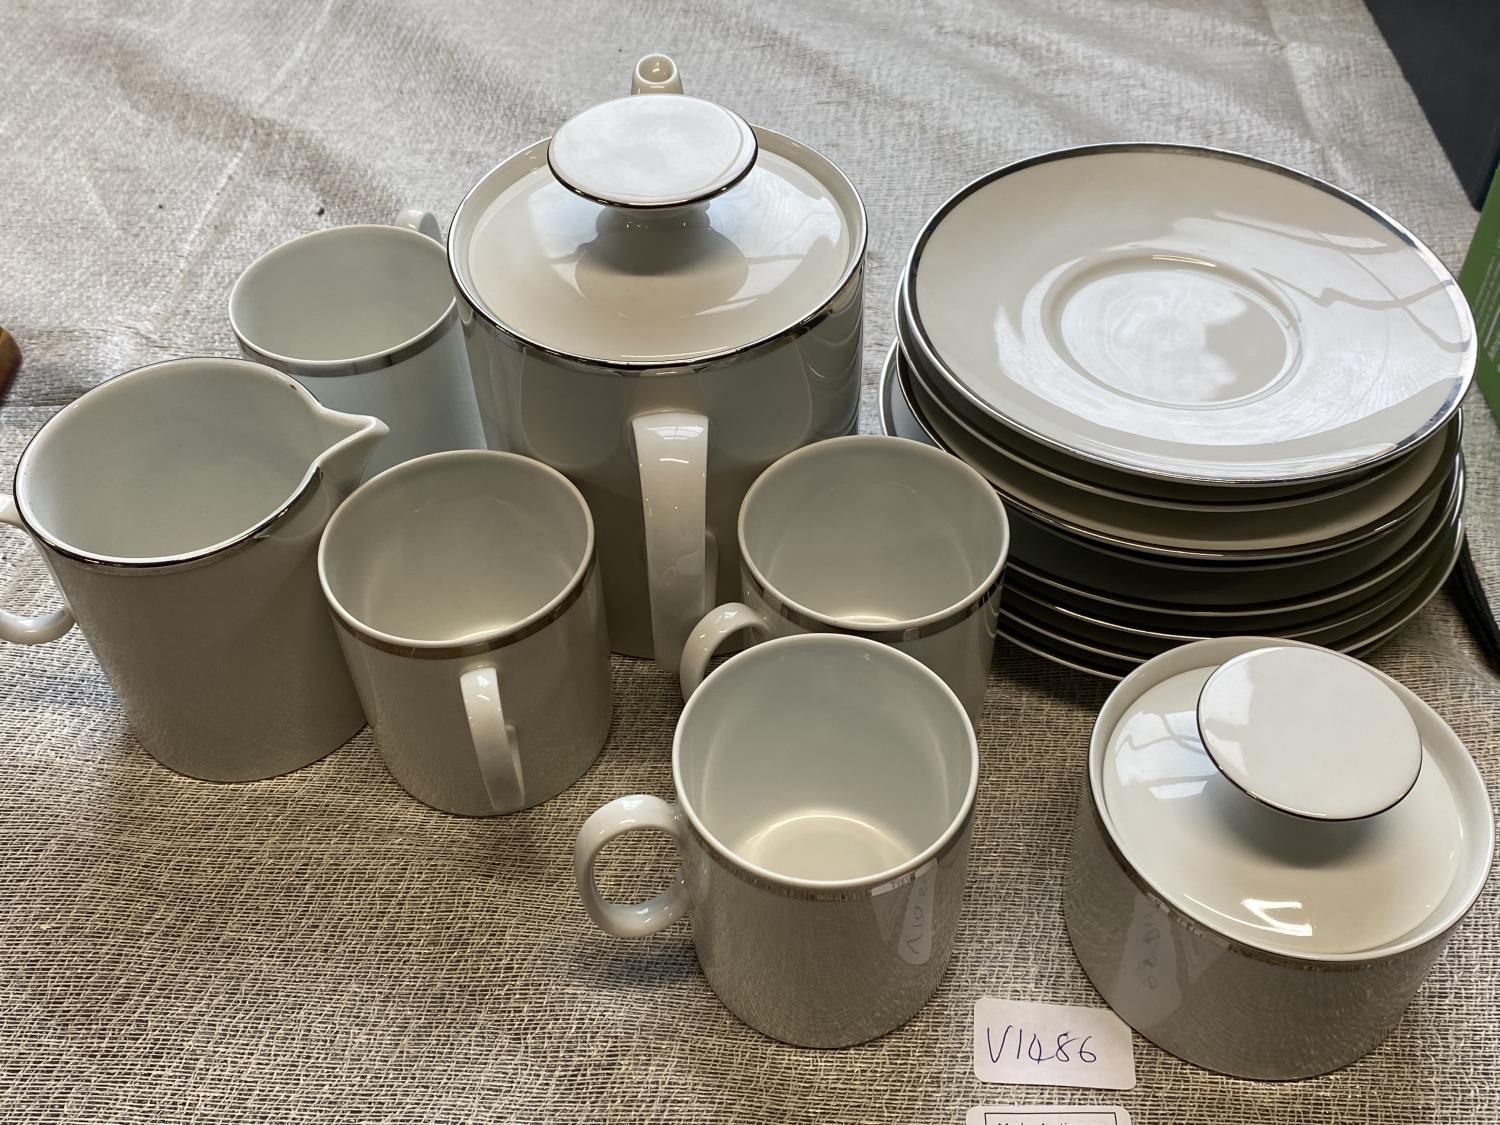 A good quality Thomas of Germany ceramic coffee service 15 pieces, shipping unavailable